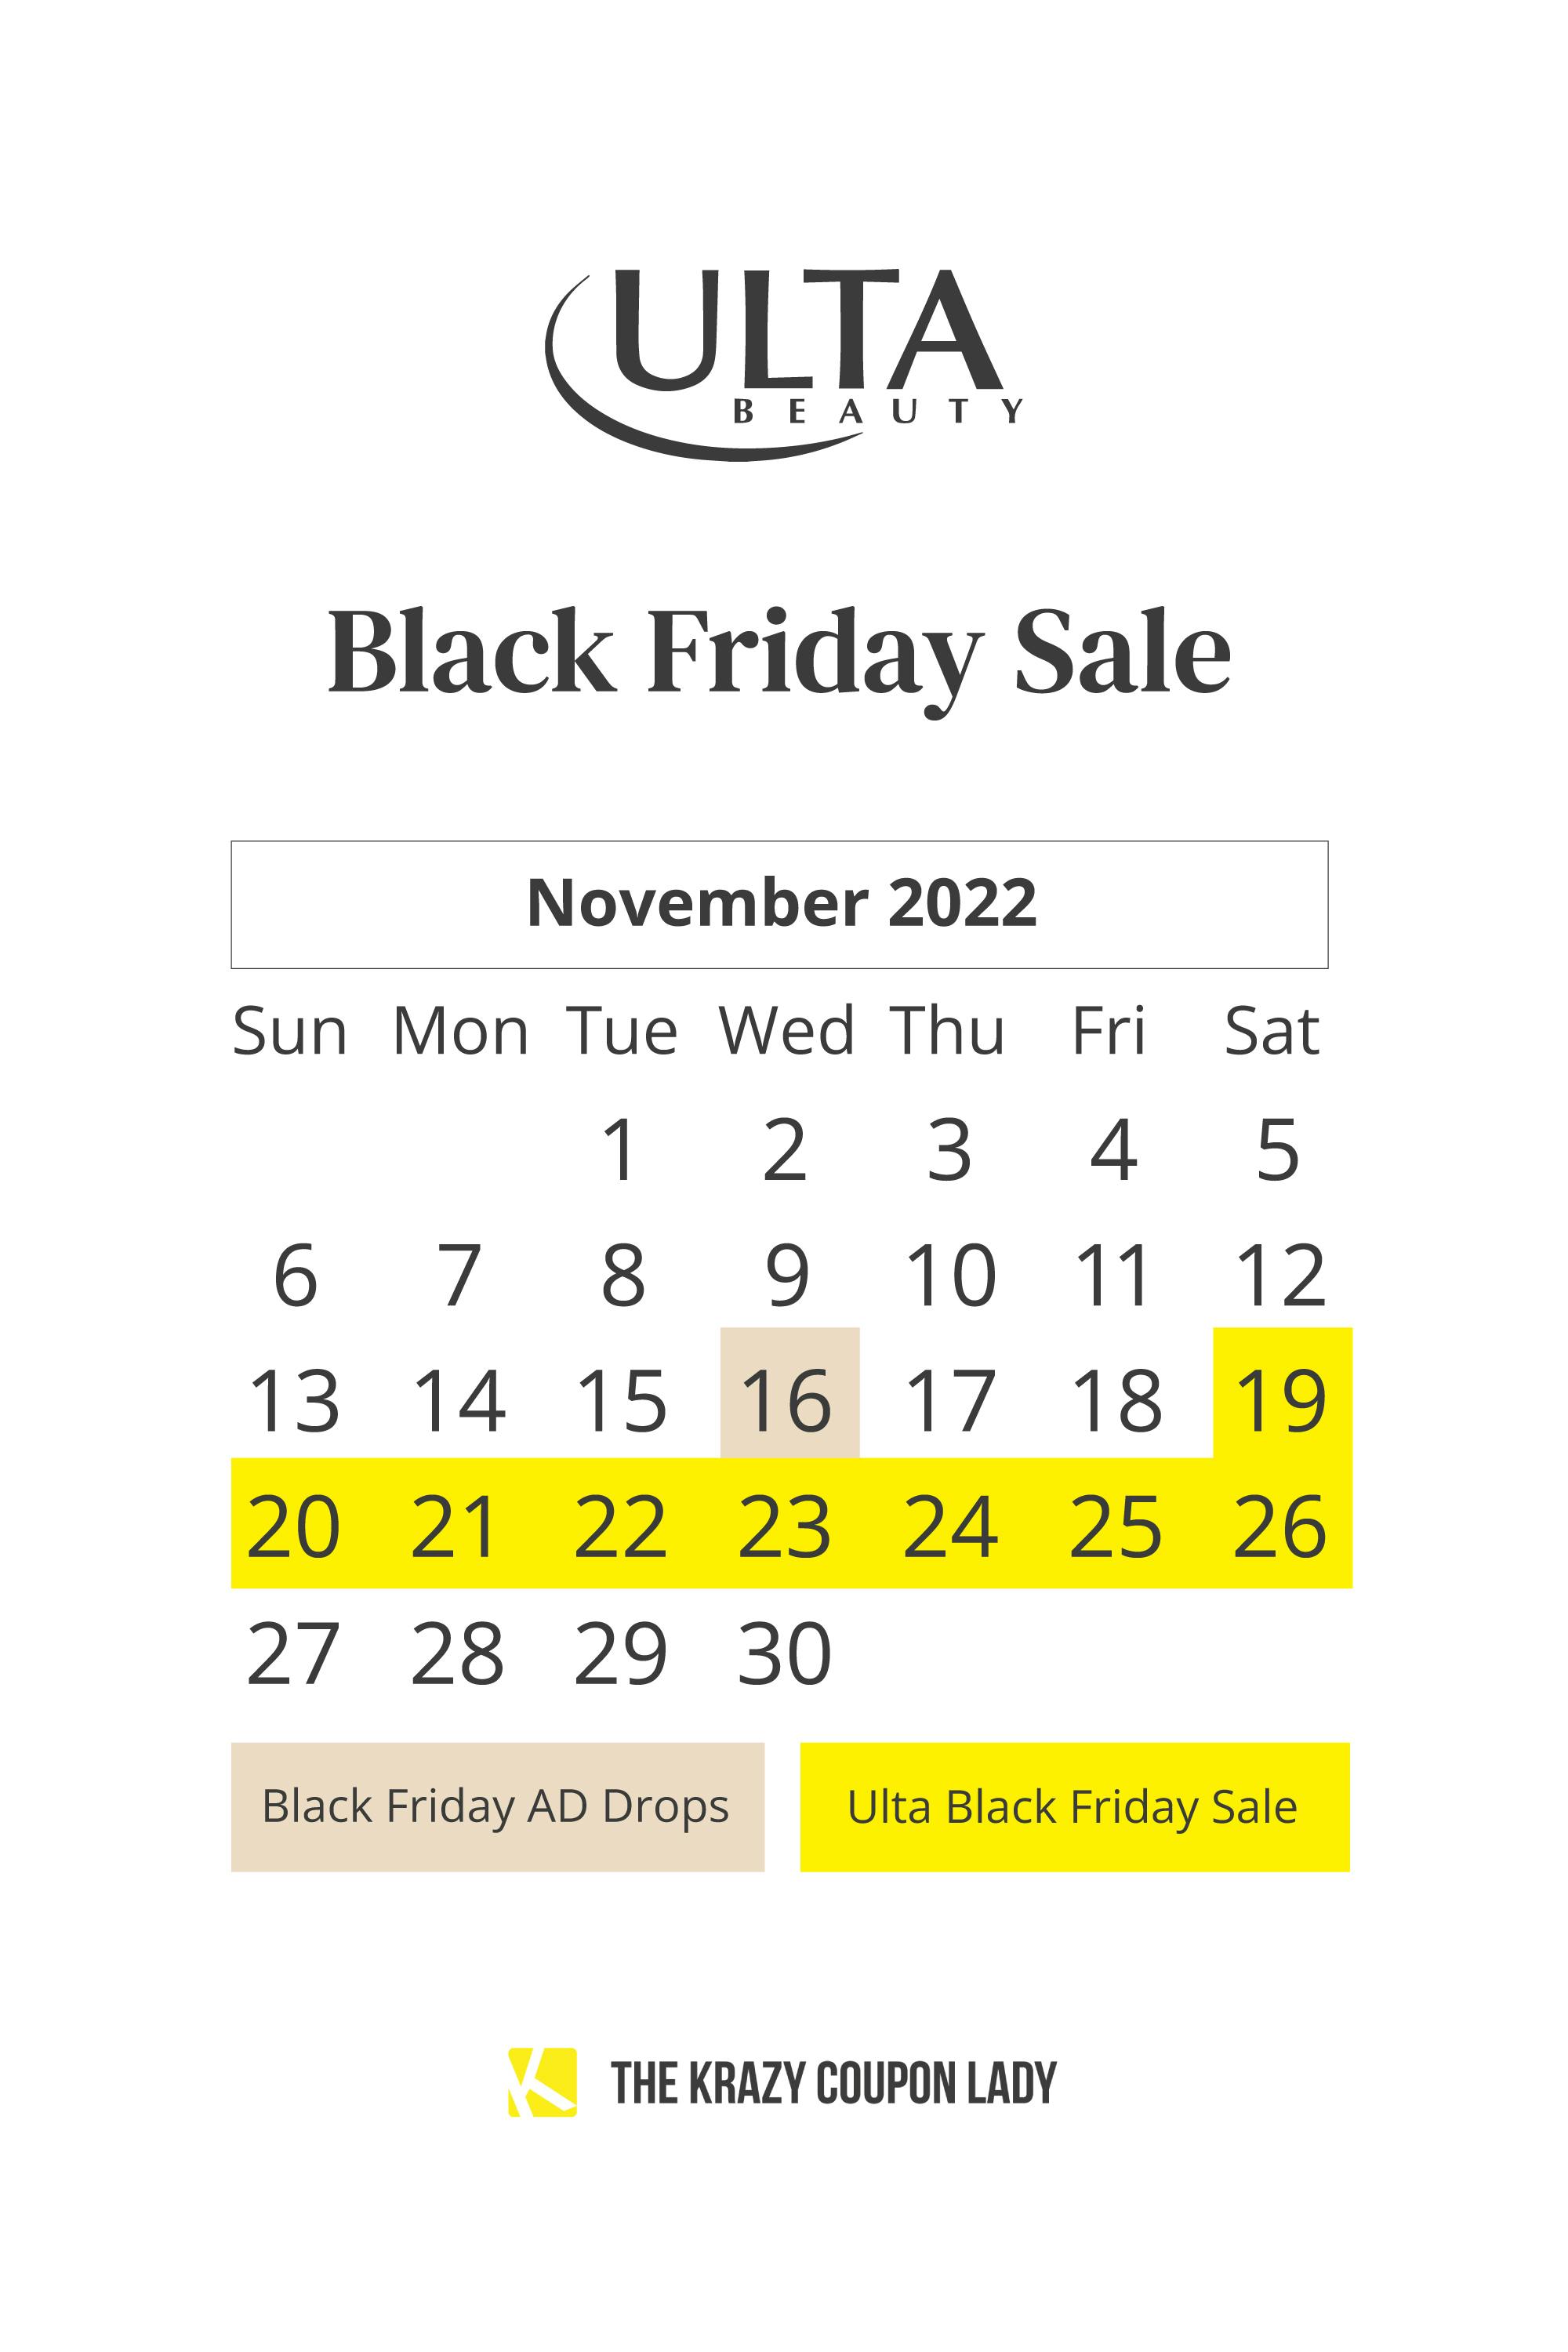 a graphic showing the ulta black friday ad dropped on Nov. 16 and the 2022 black friday sale will run from Nov. 19-26